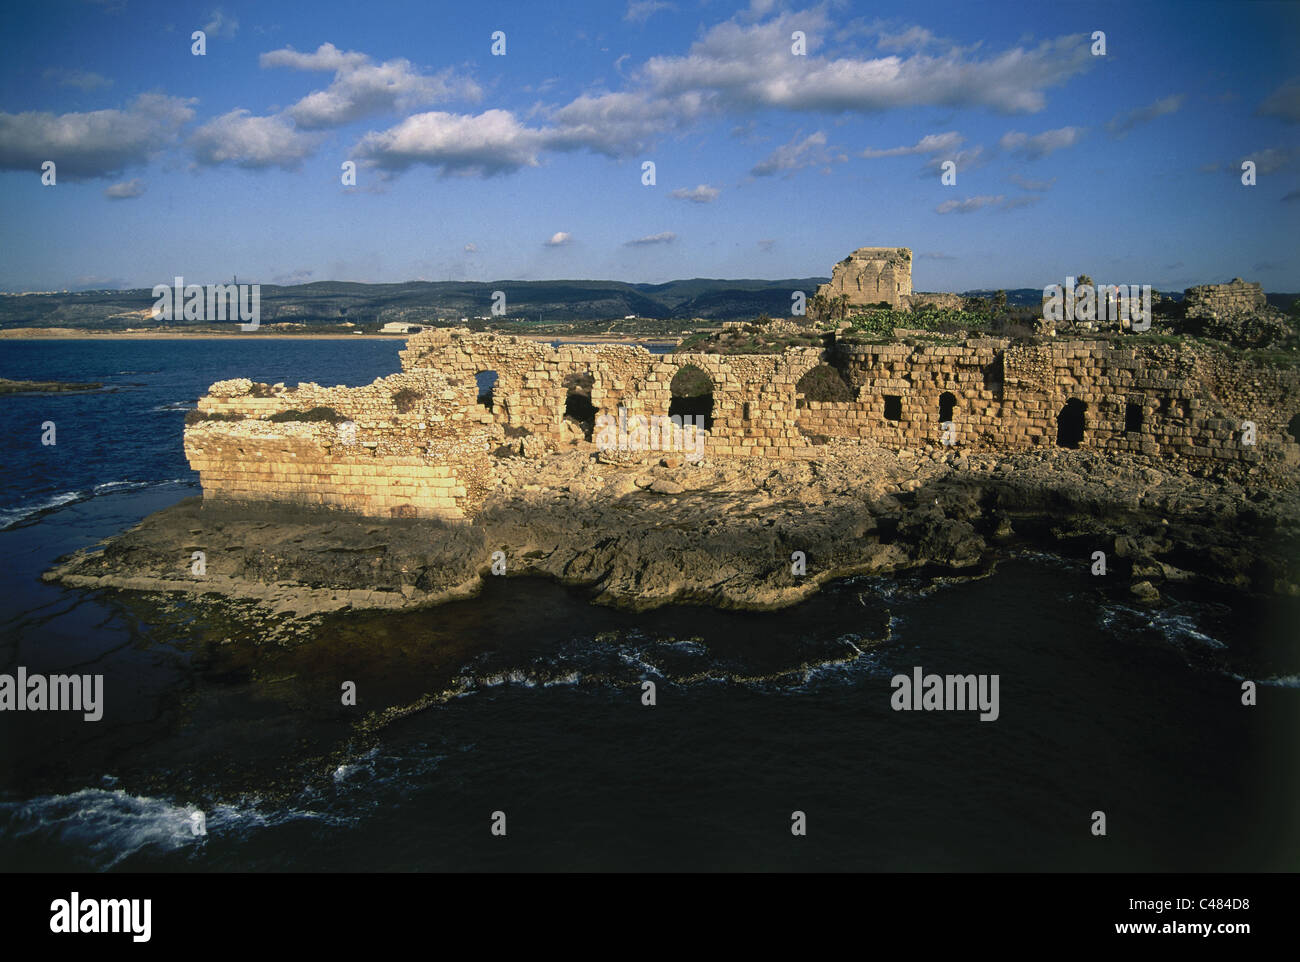 Aerial photograph of the fortress of Athlit in the coastal plain Stock Photo